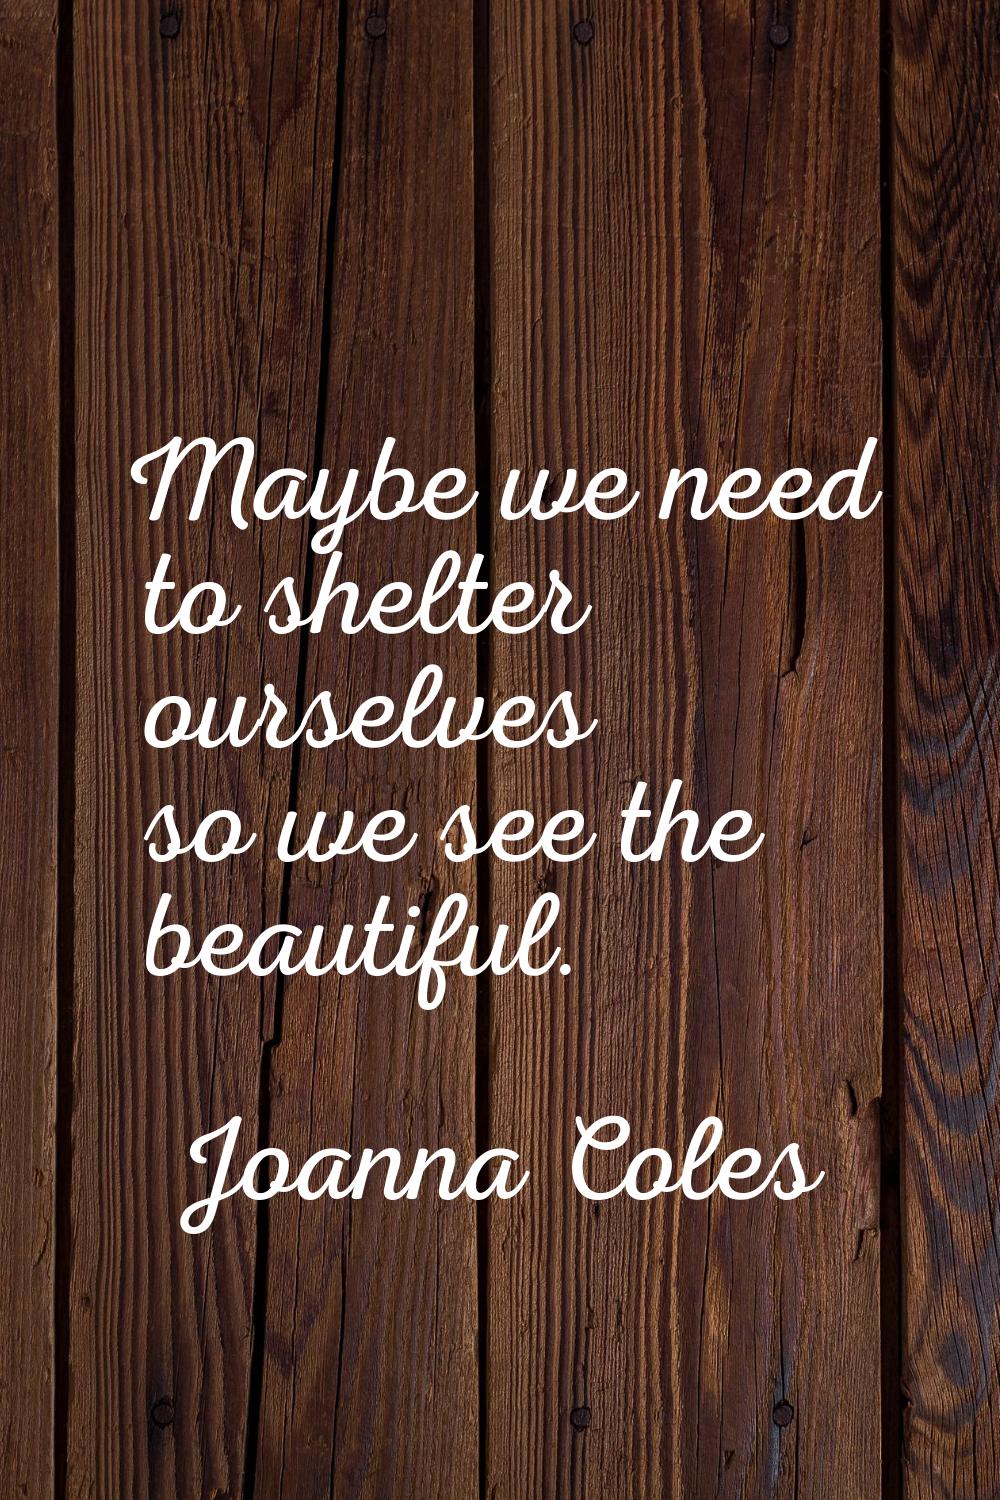 Maybe we need to shelter ourselves so we see the beautiful.